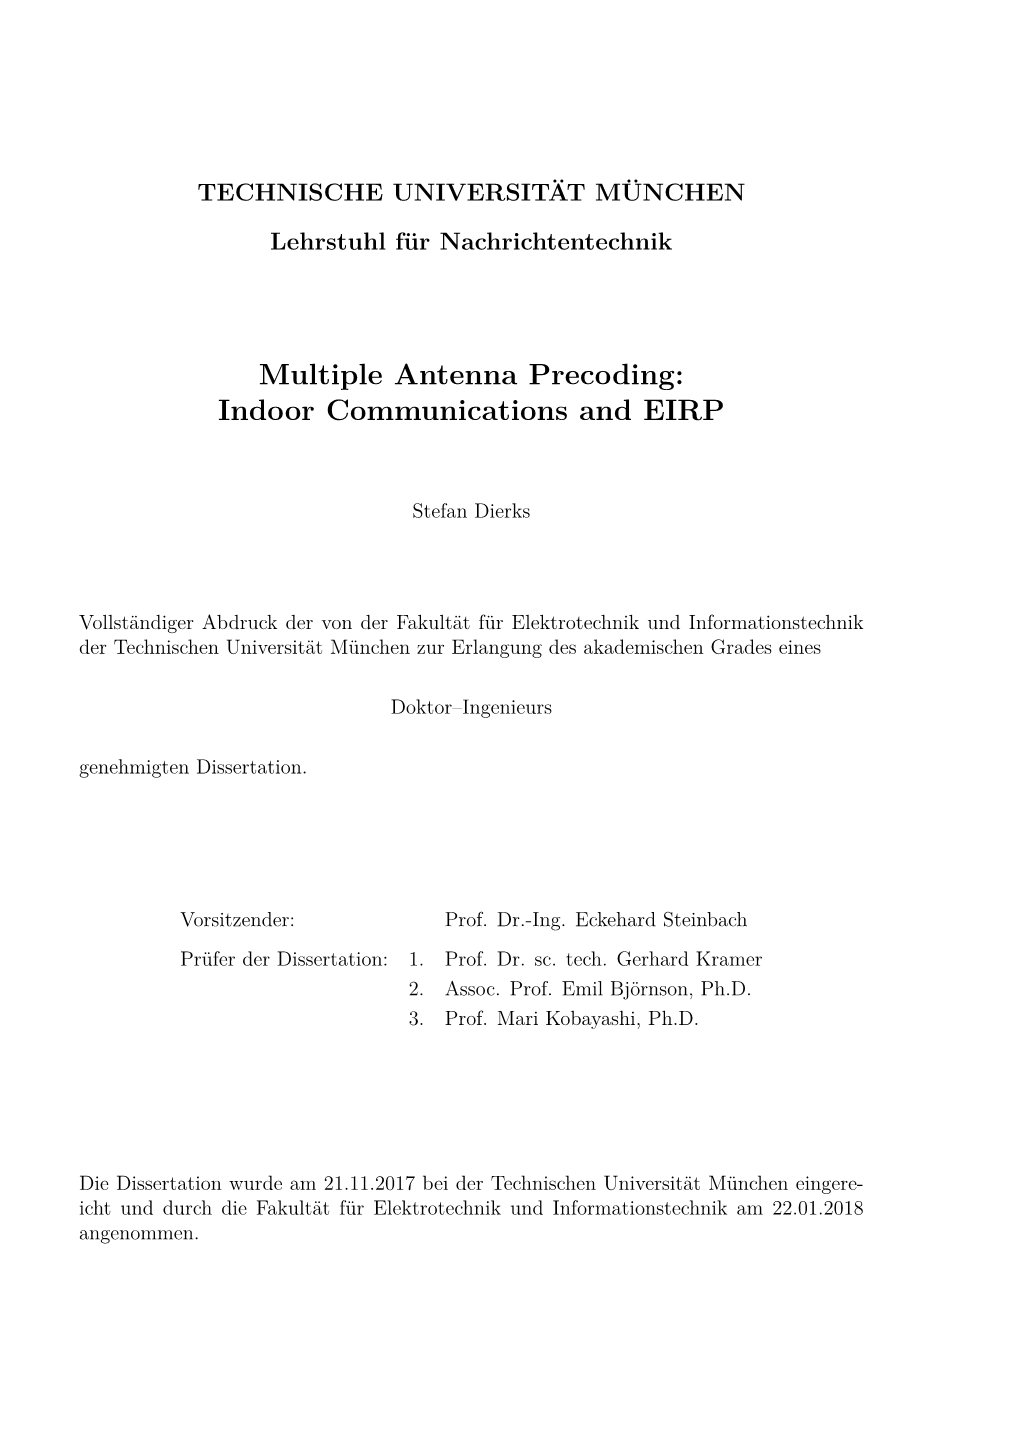 Multiple Antenna Precoding: Indoor Communications and EIRP